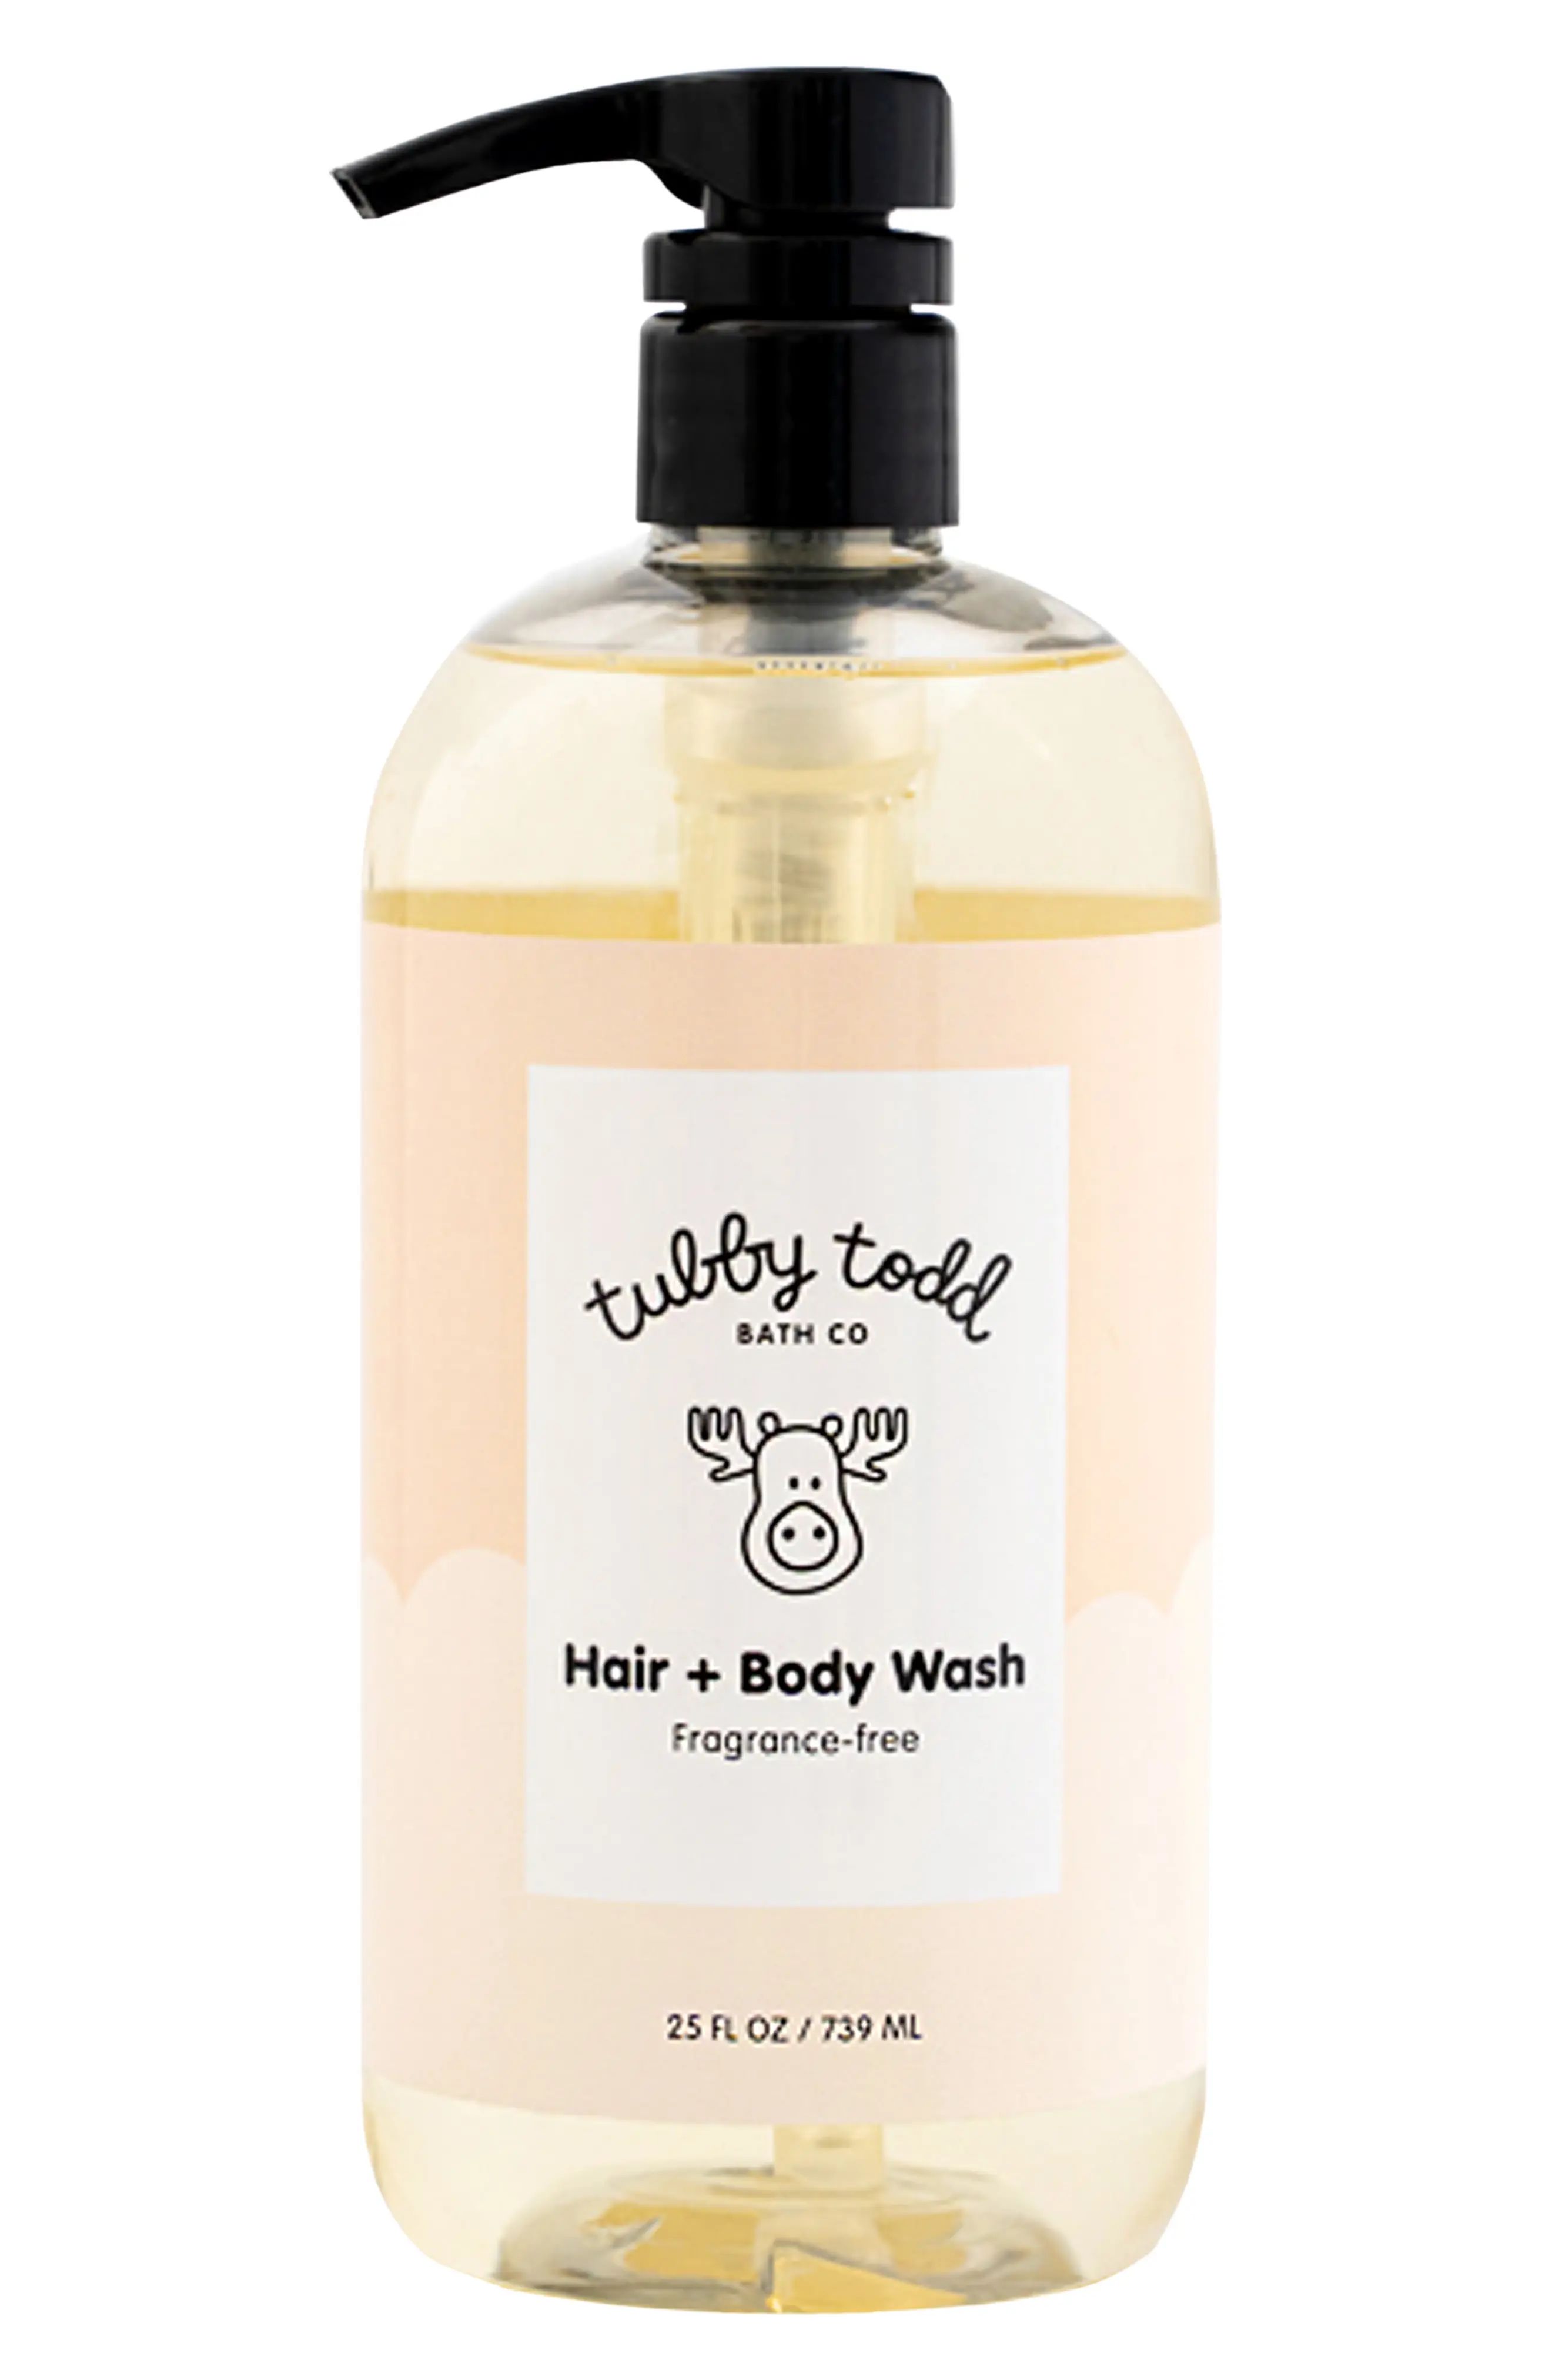 Tubby Todd Bath Co. Hair + Body Wash in Fragrance-Free at Nordstrom | Nordstrom